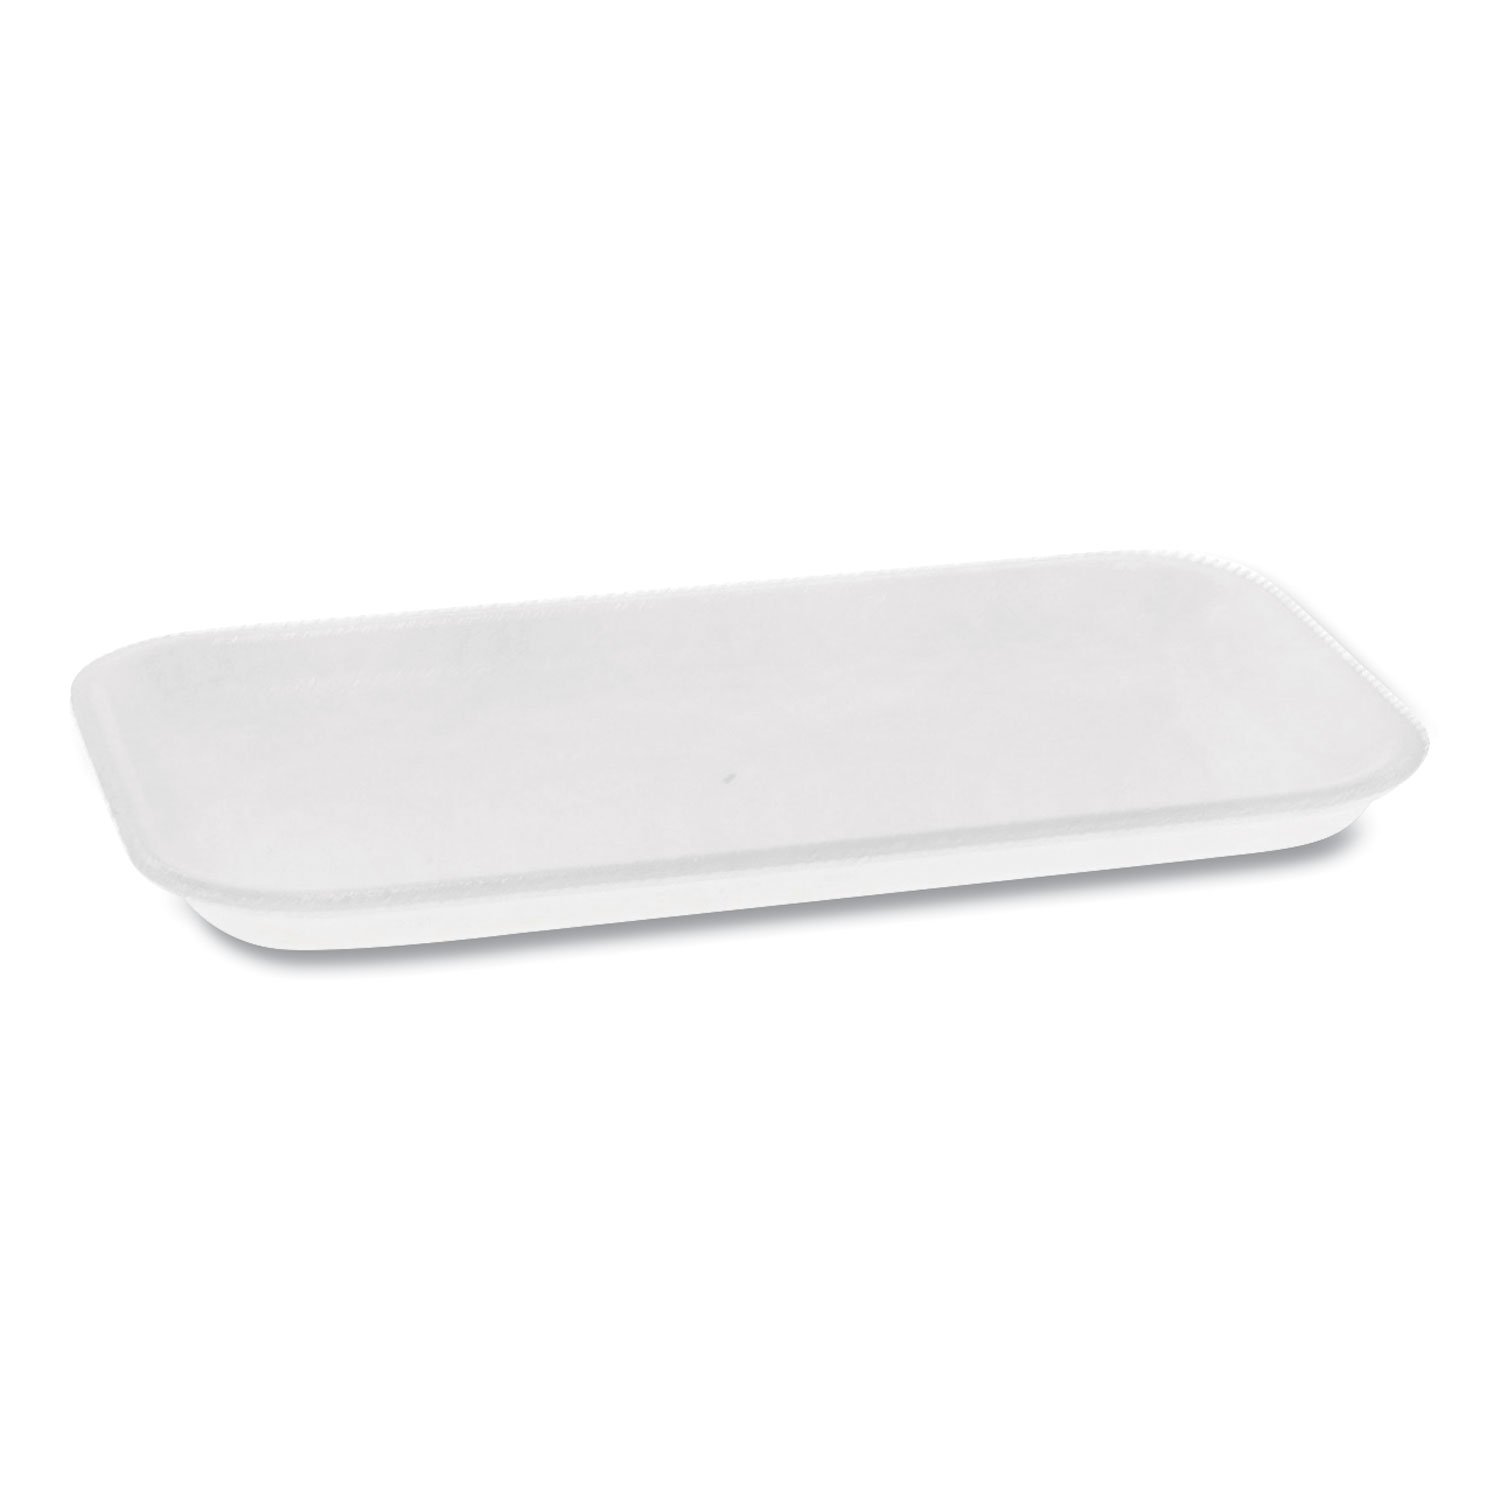  Pactiv PAC 0TF117S0 Meat Tray, #17 Shallow, 8.3 x 4.8 x 0.65, White, 1,000/Carton (PCT0TF117S0) 